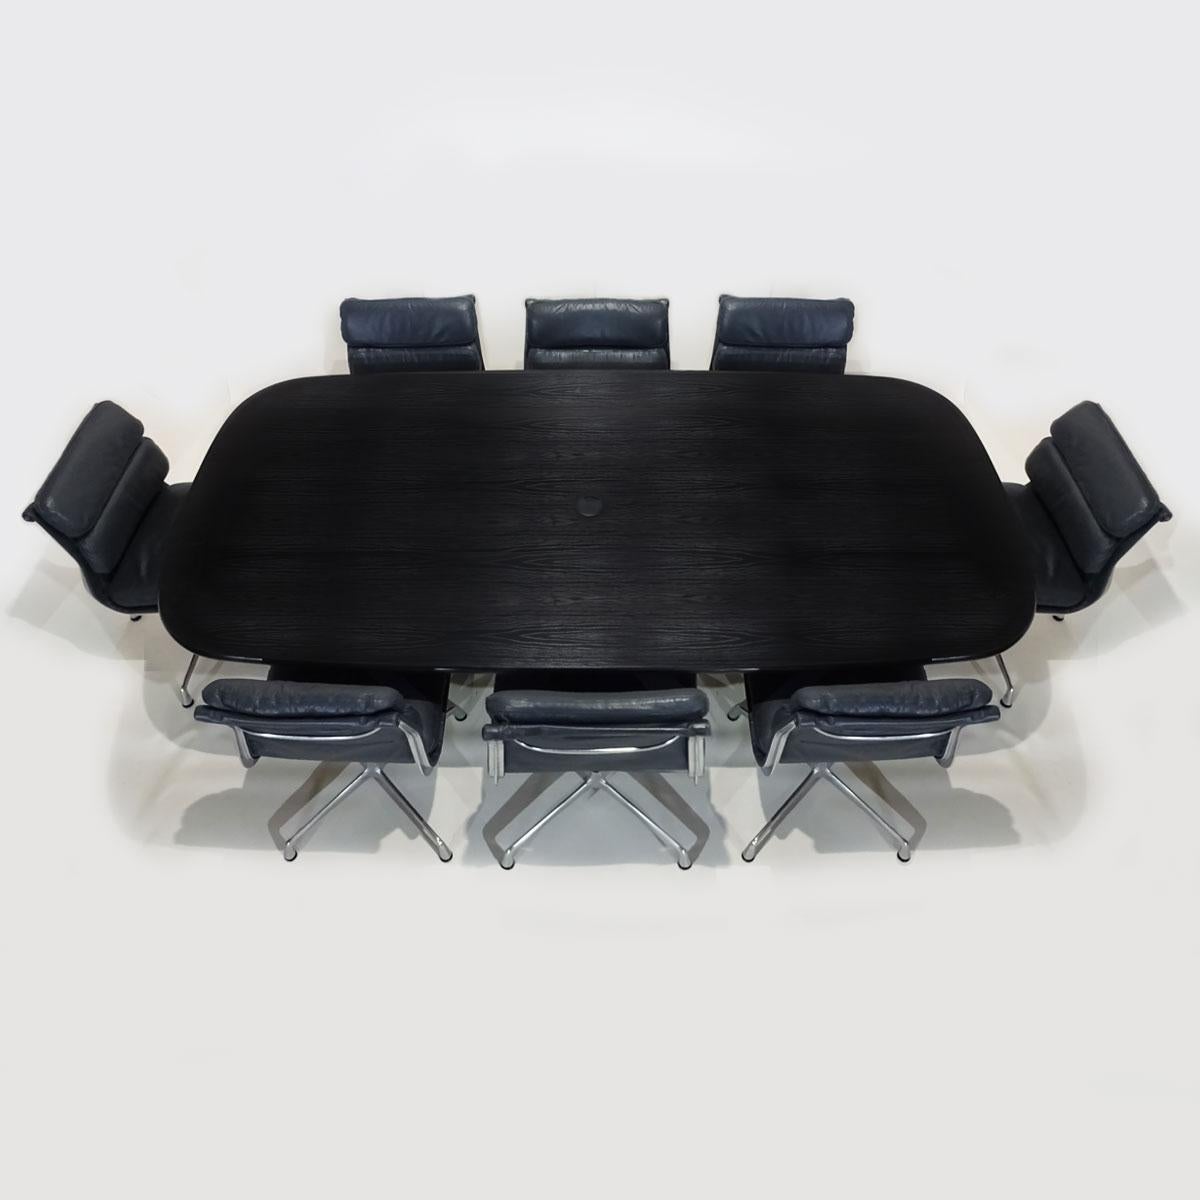 An exceptional vintage Charles and Ray Eames Boardroom table and chair set with original Vitra table and 8 dark grey leather Herman Miller soft pad chairs.

Dating from the mid-1980s this is a truly rare and beautiful example of a complete